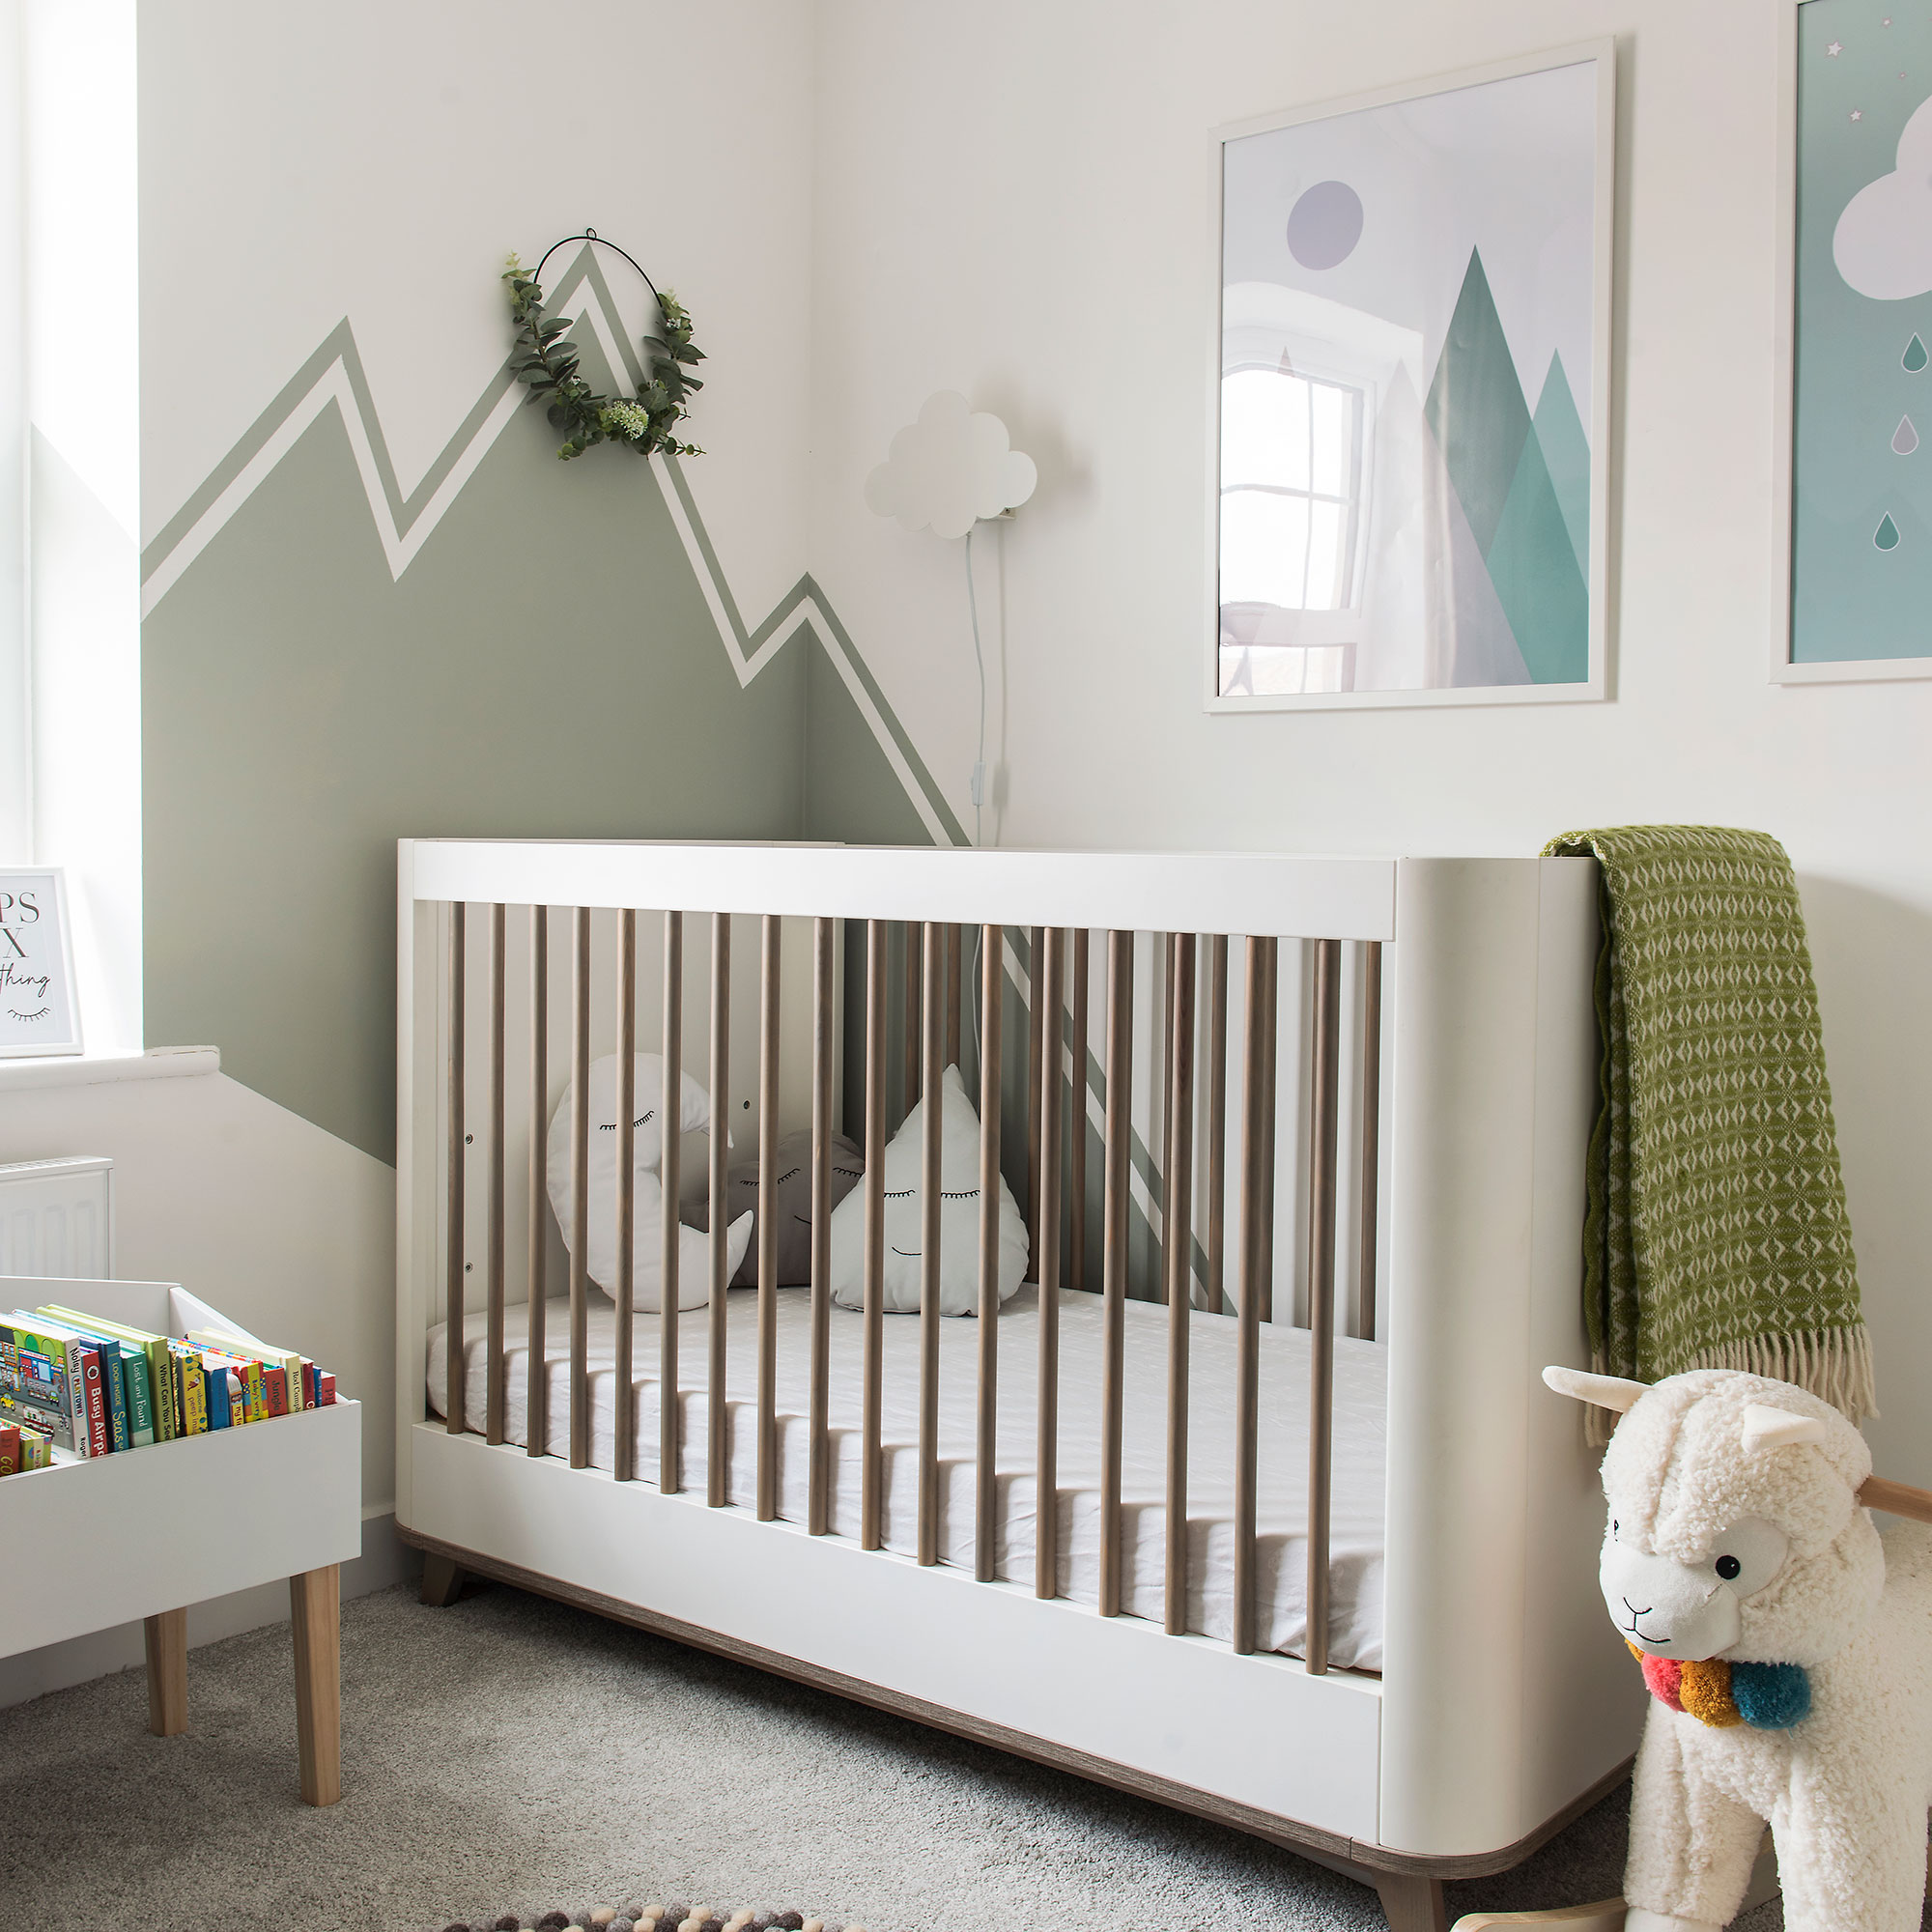 Nursery with green paint effects on wall behind crib